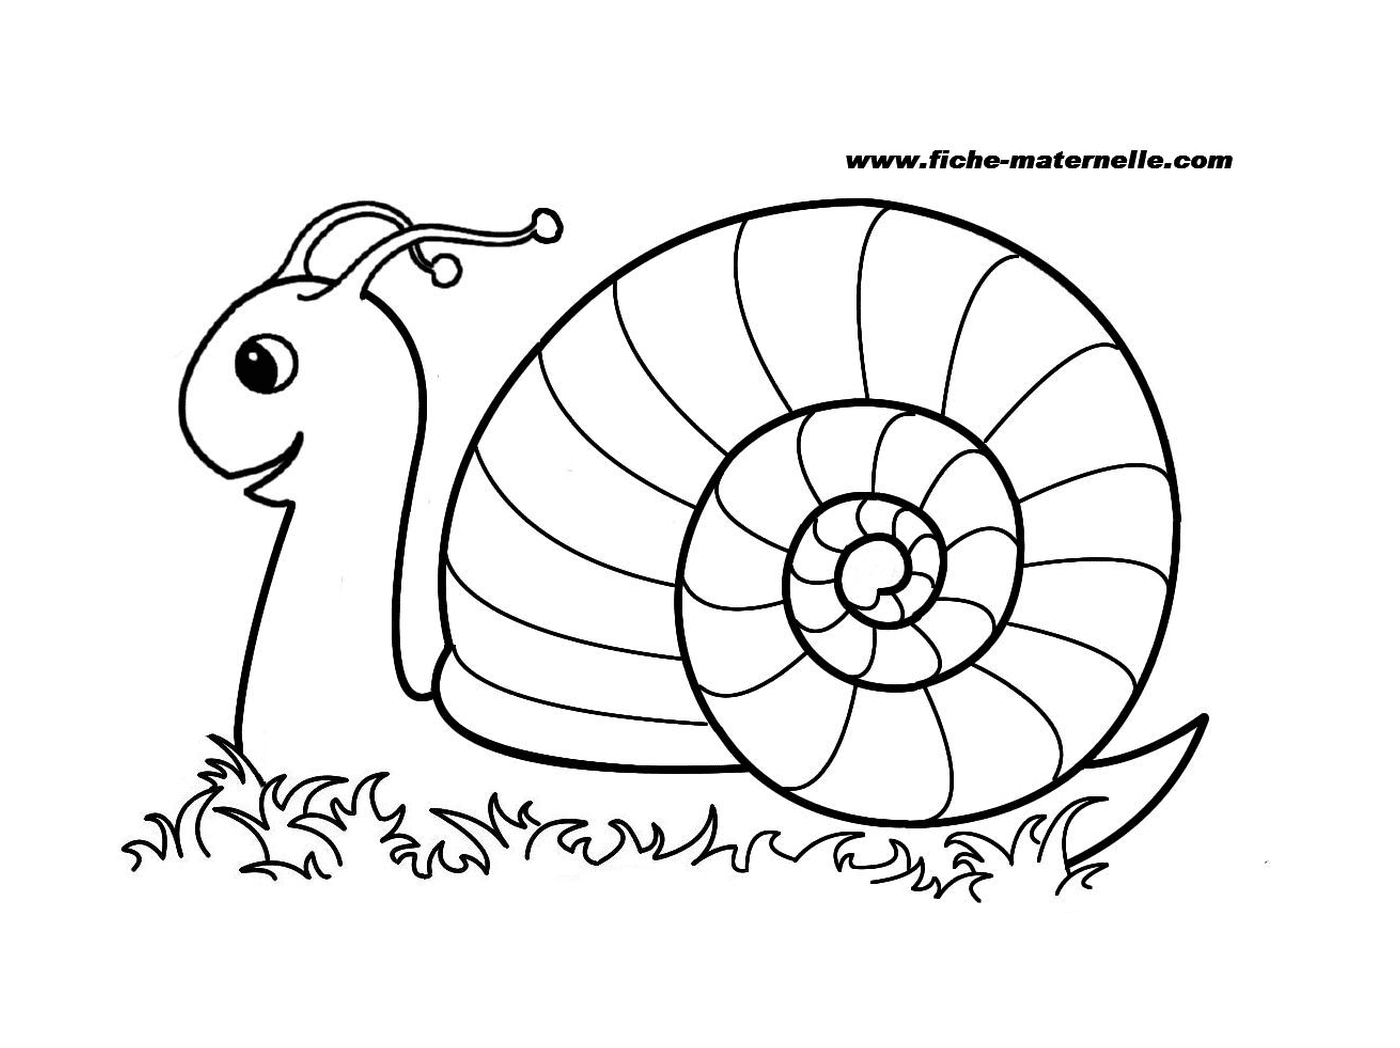  Slow and curious snail 